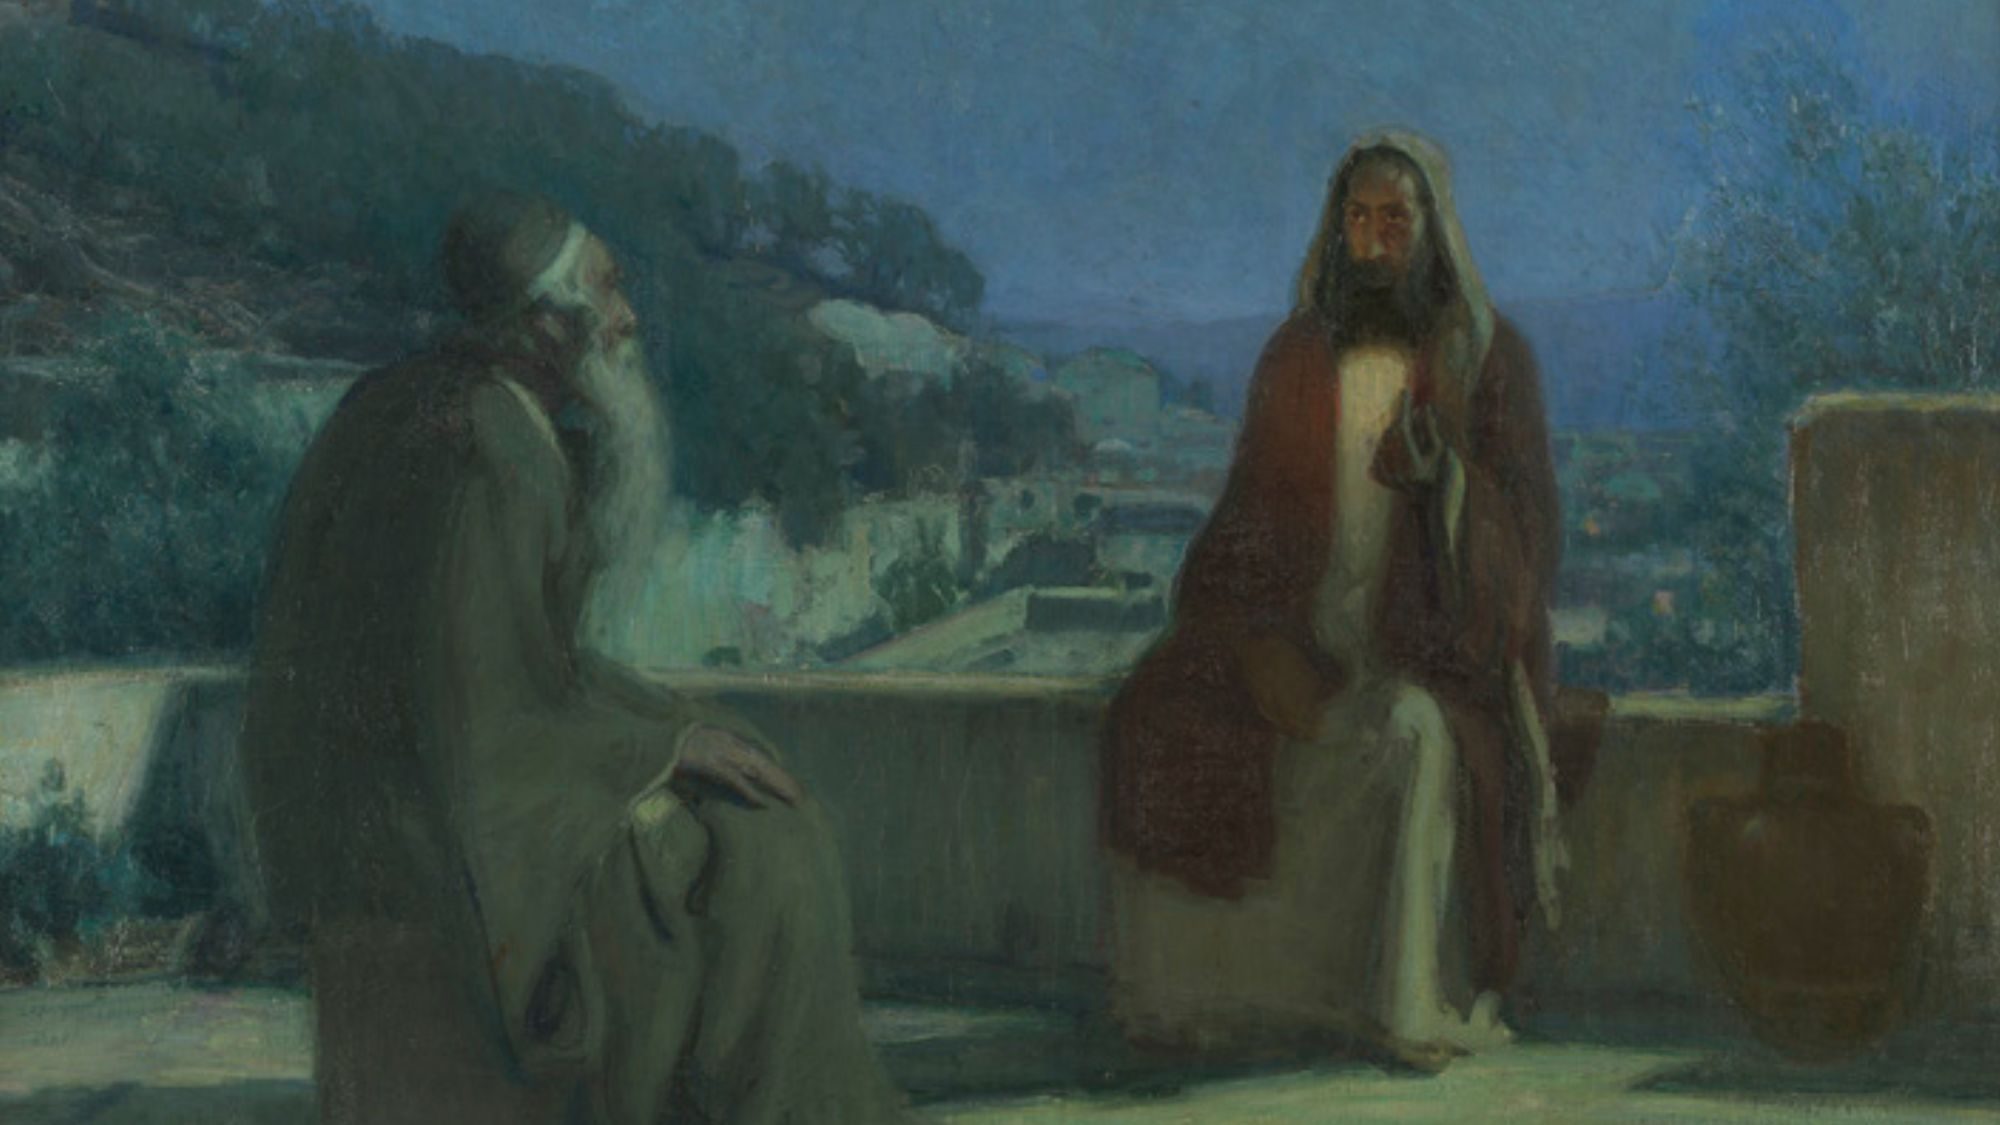 The painting, Nicodemus by Henry O. Tanner, depicts the Pharisee and Jesus speaking and sitting together.